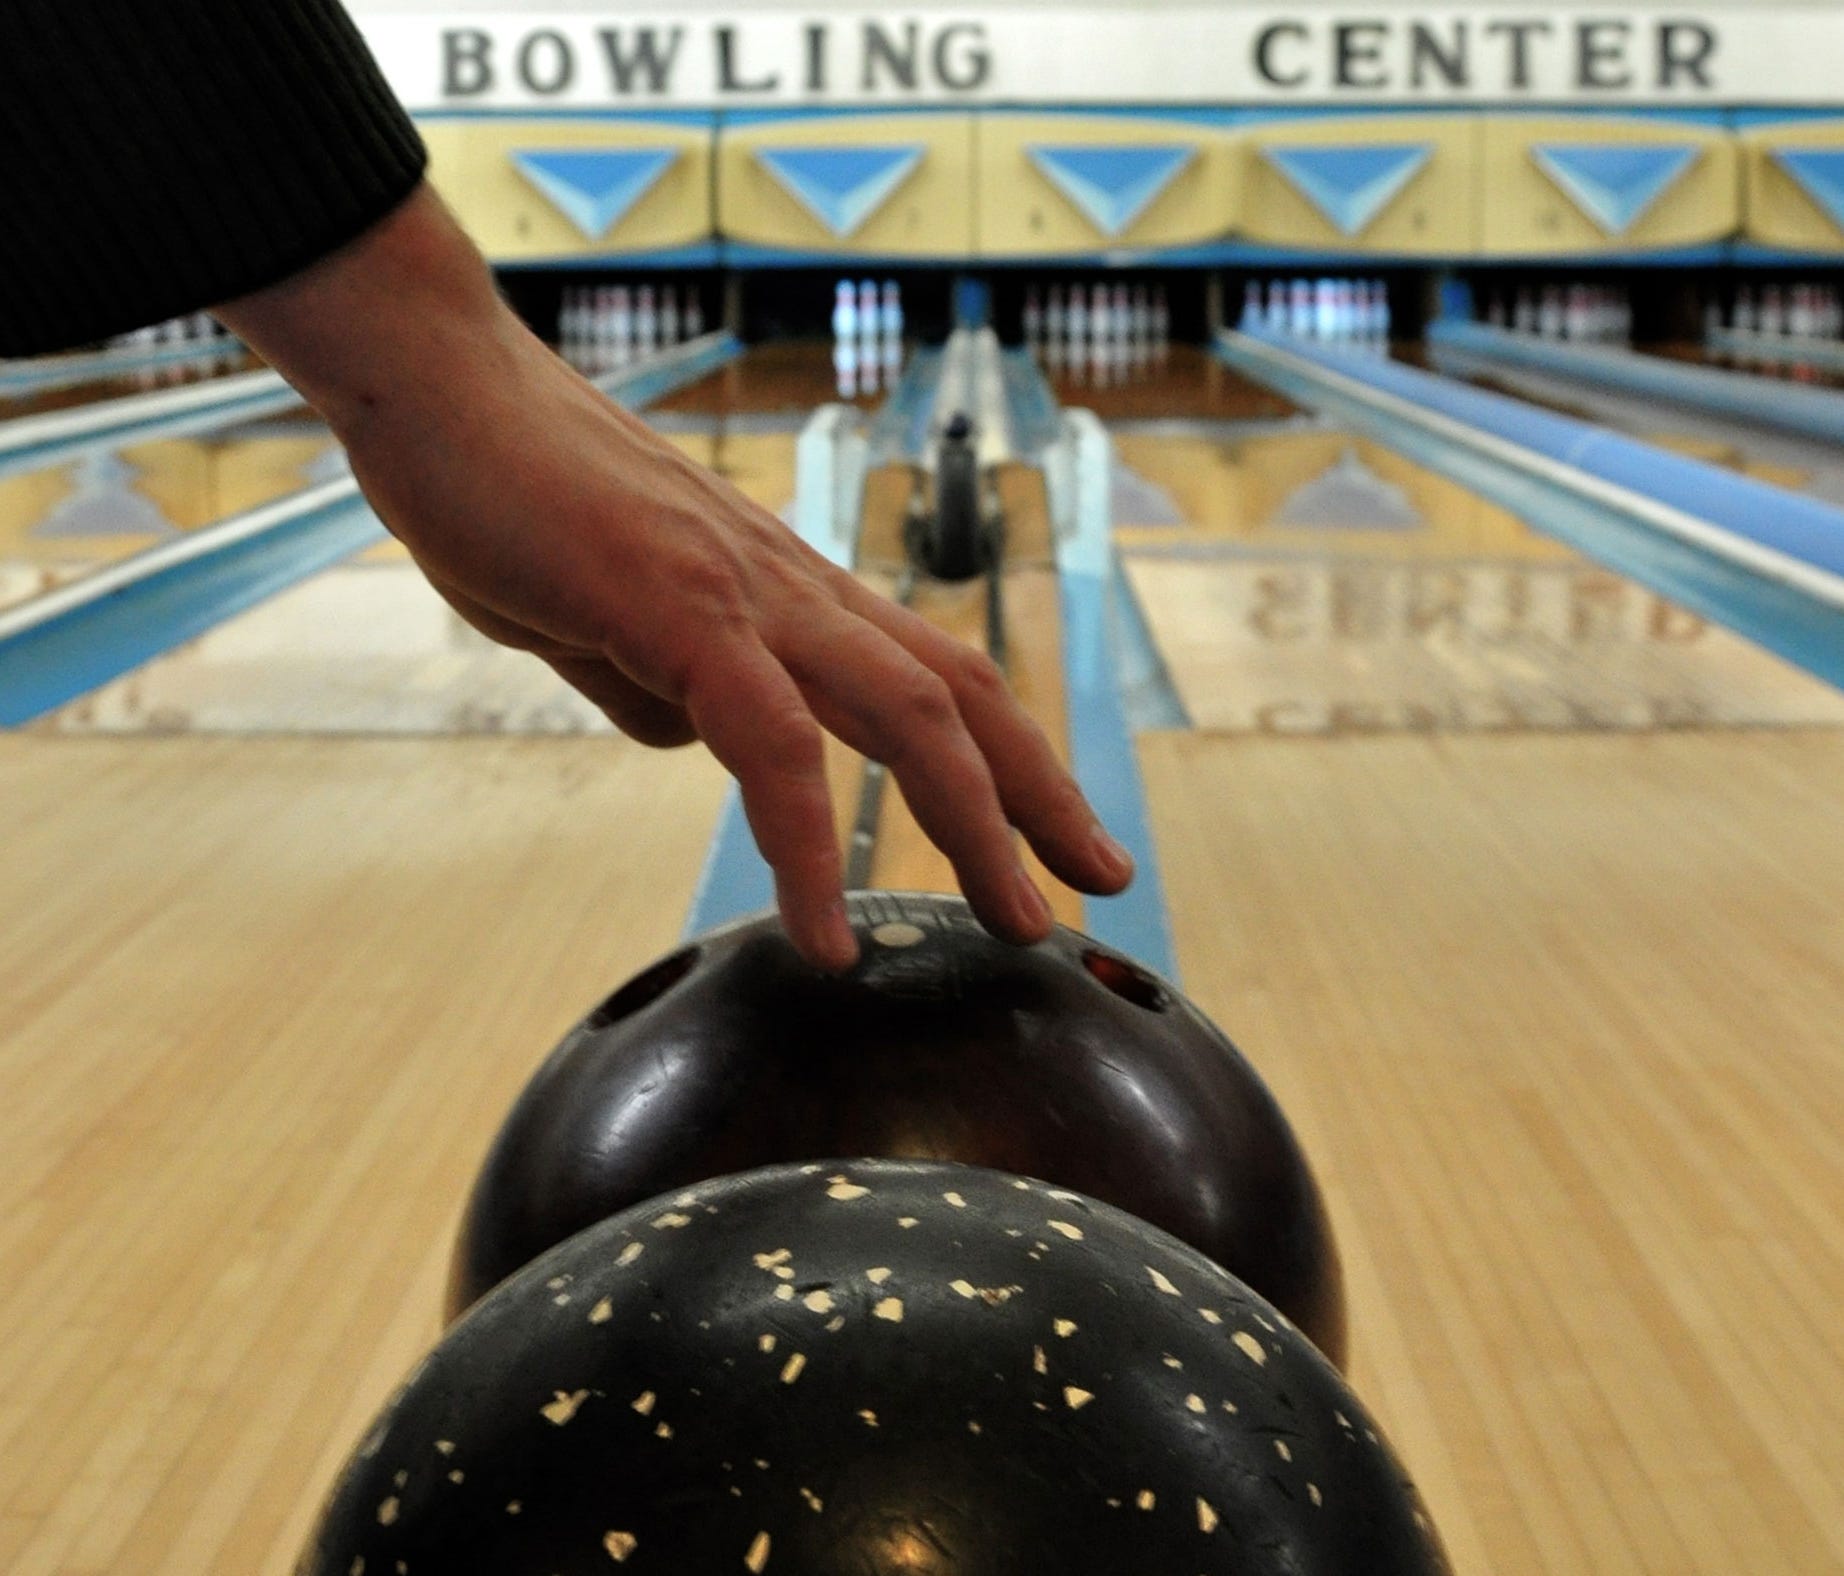 While many bowling alleys are being updated at an alarming rate, there are still a handful of lanes  that harken back to the golden age of bowling